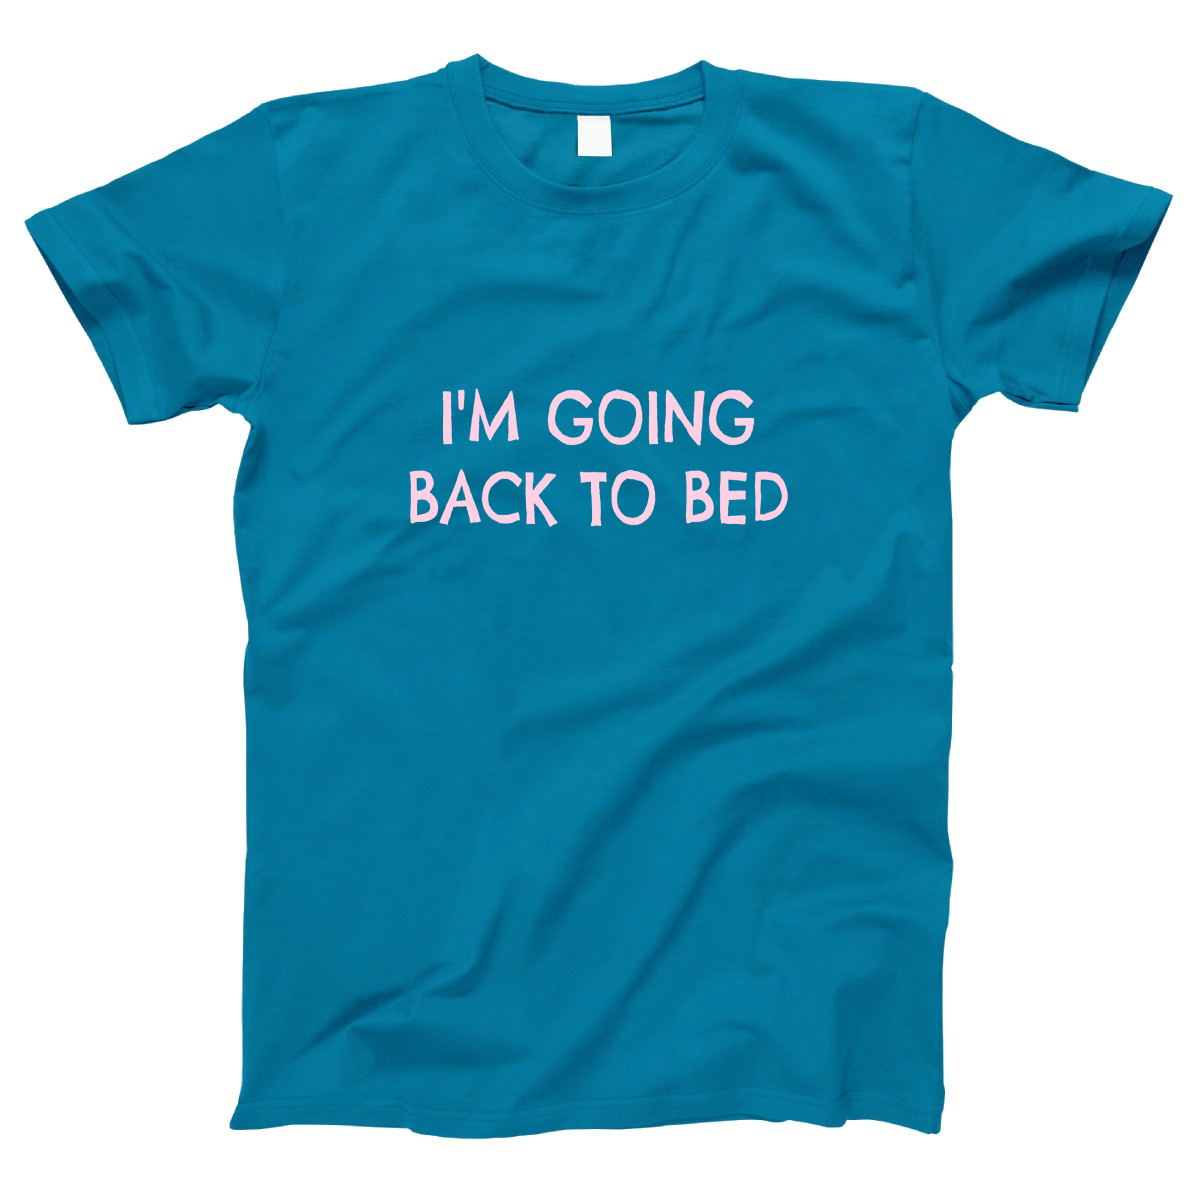 I'm Going Back to Bed Women's T-shirt | Turquoise